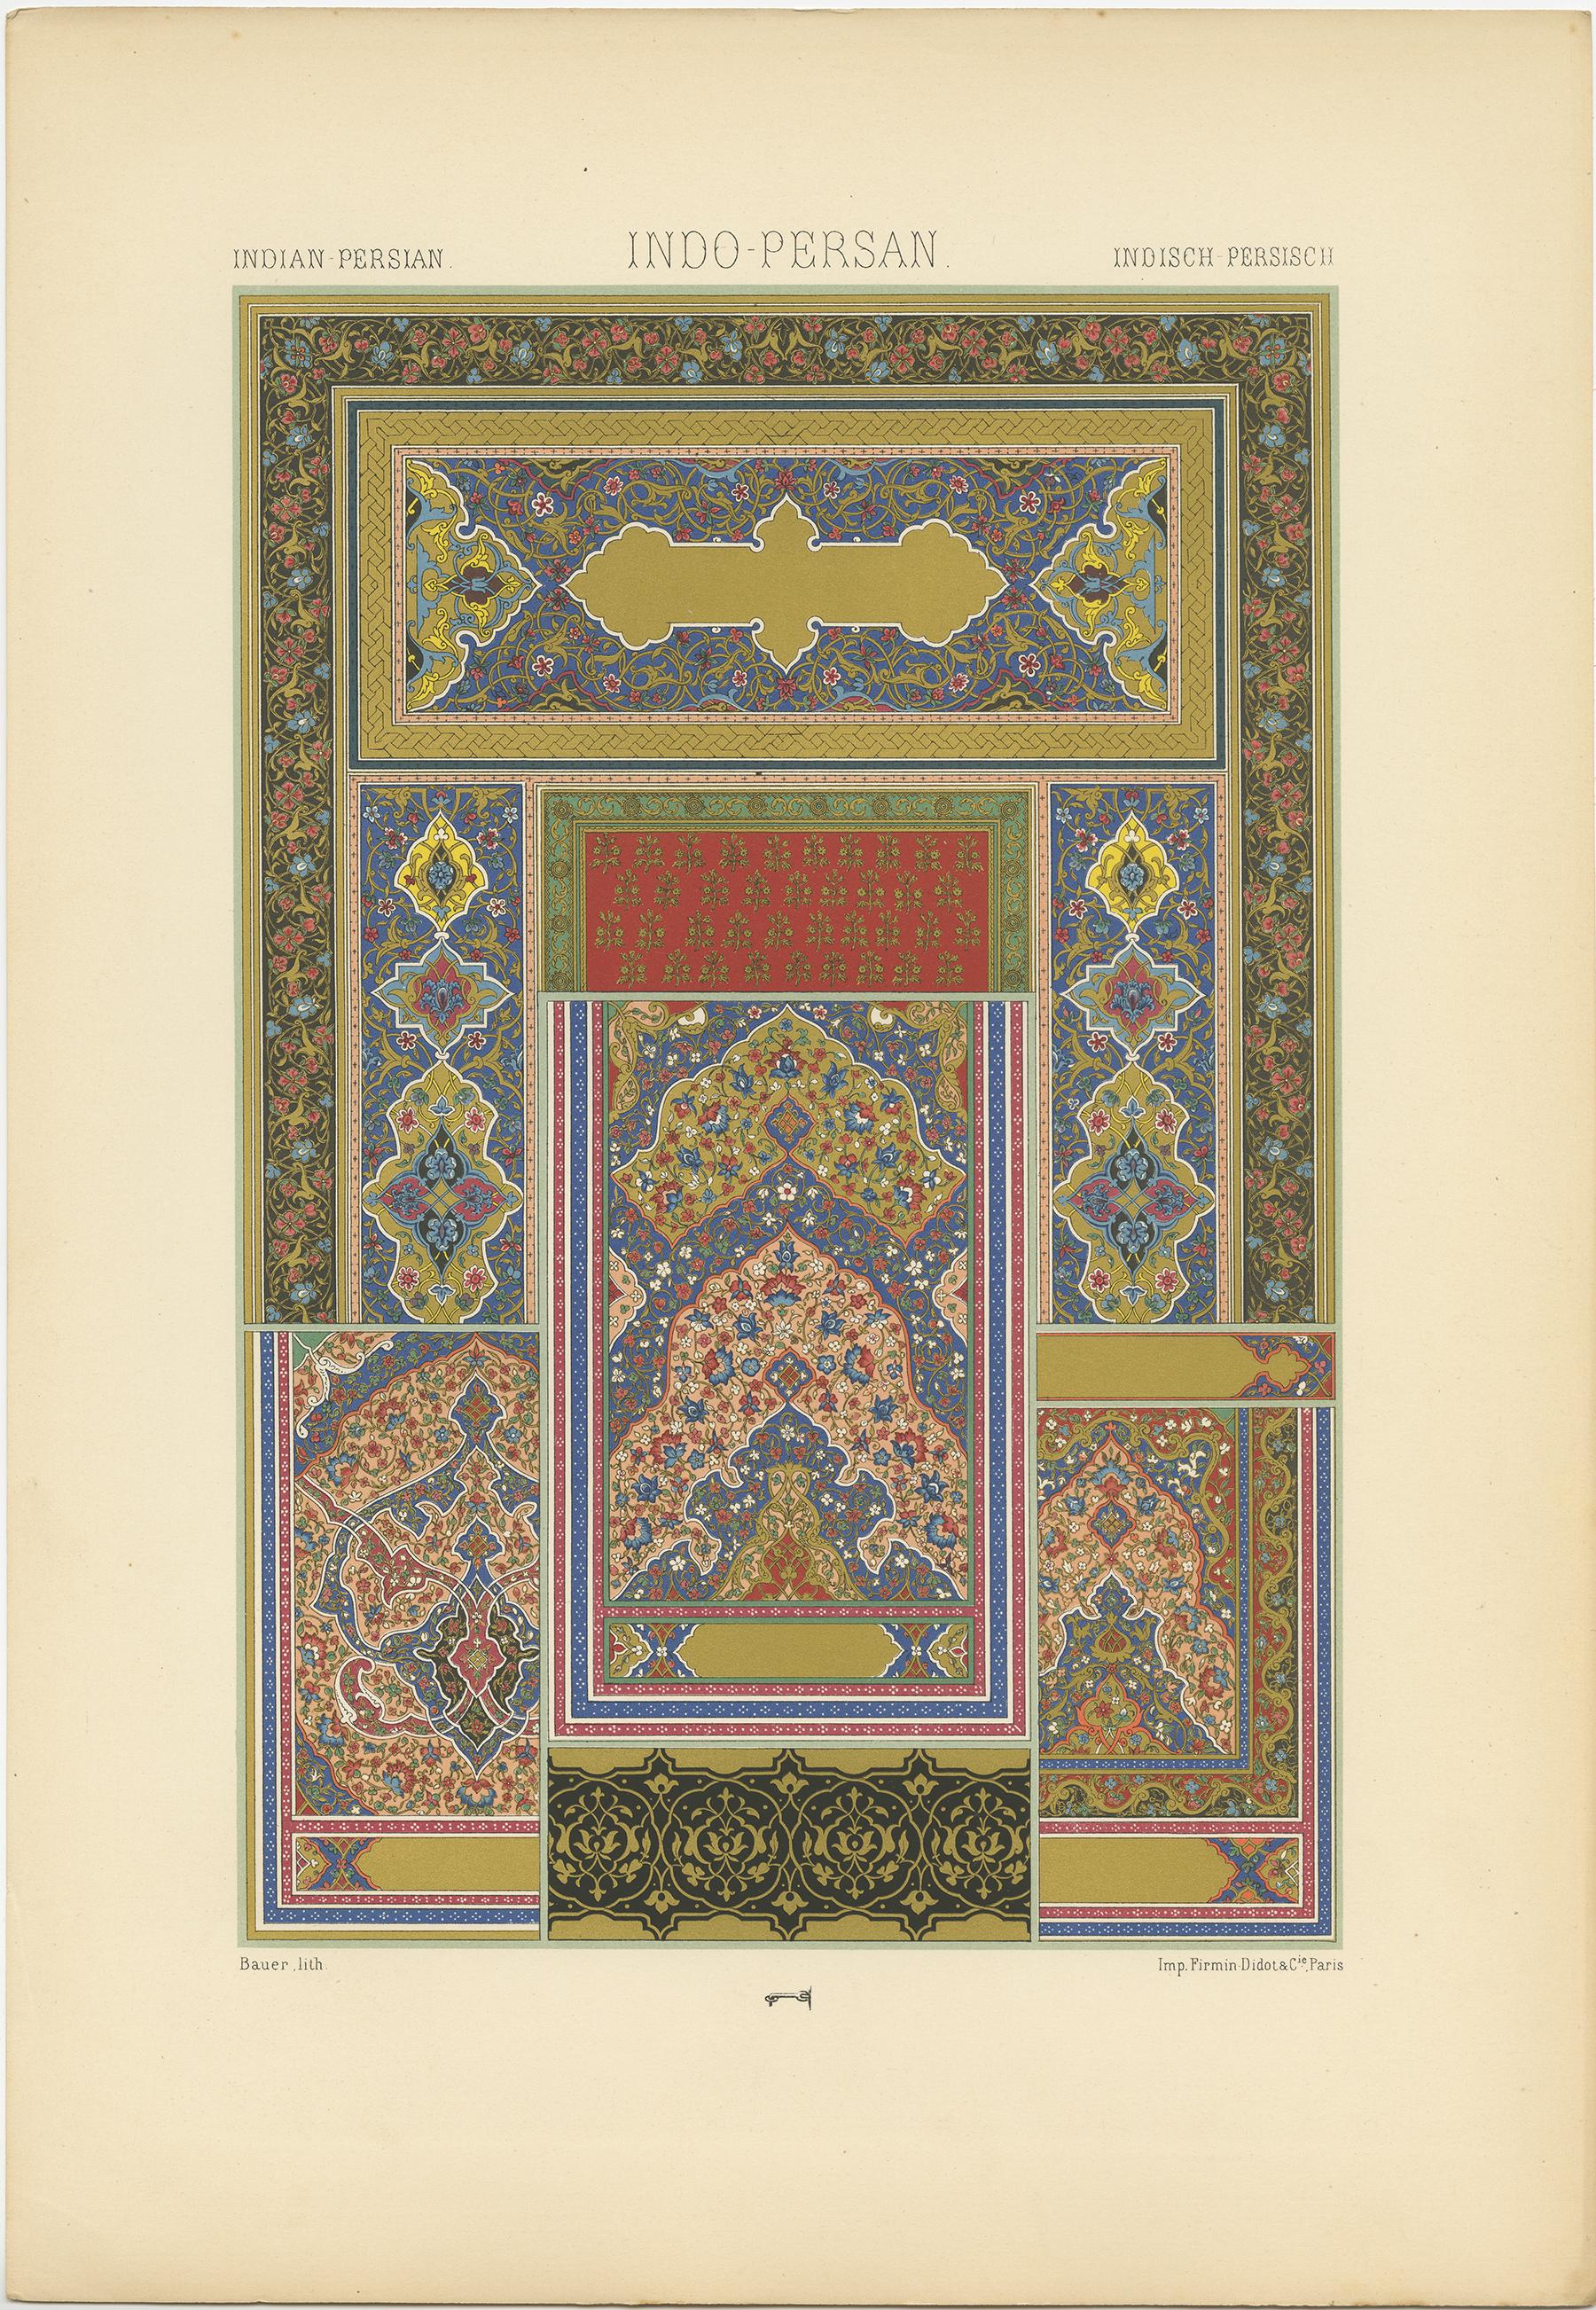 Antique print titled 'Indo Persian -Indo Persan- Indo Persisch'. Chromolithograph of Motifs from Illuminated manuscripts and niello metalworks ornaments. This print originates from 'l'Ornement Polychrome' by Auguste Racinet. Published circa 1890.